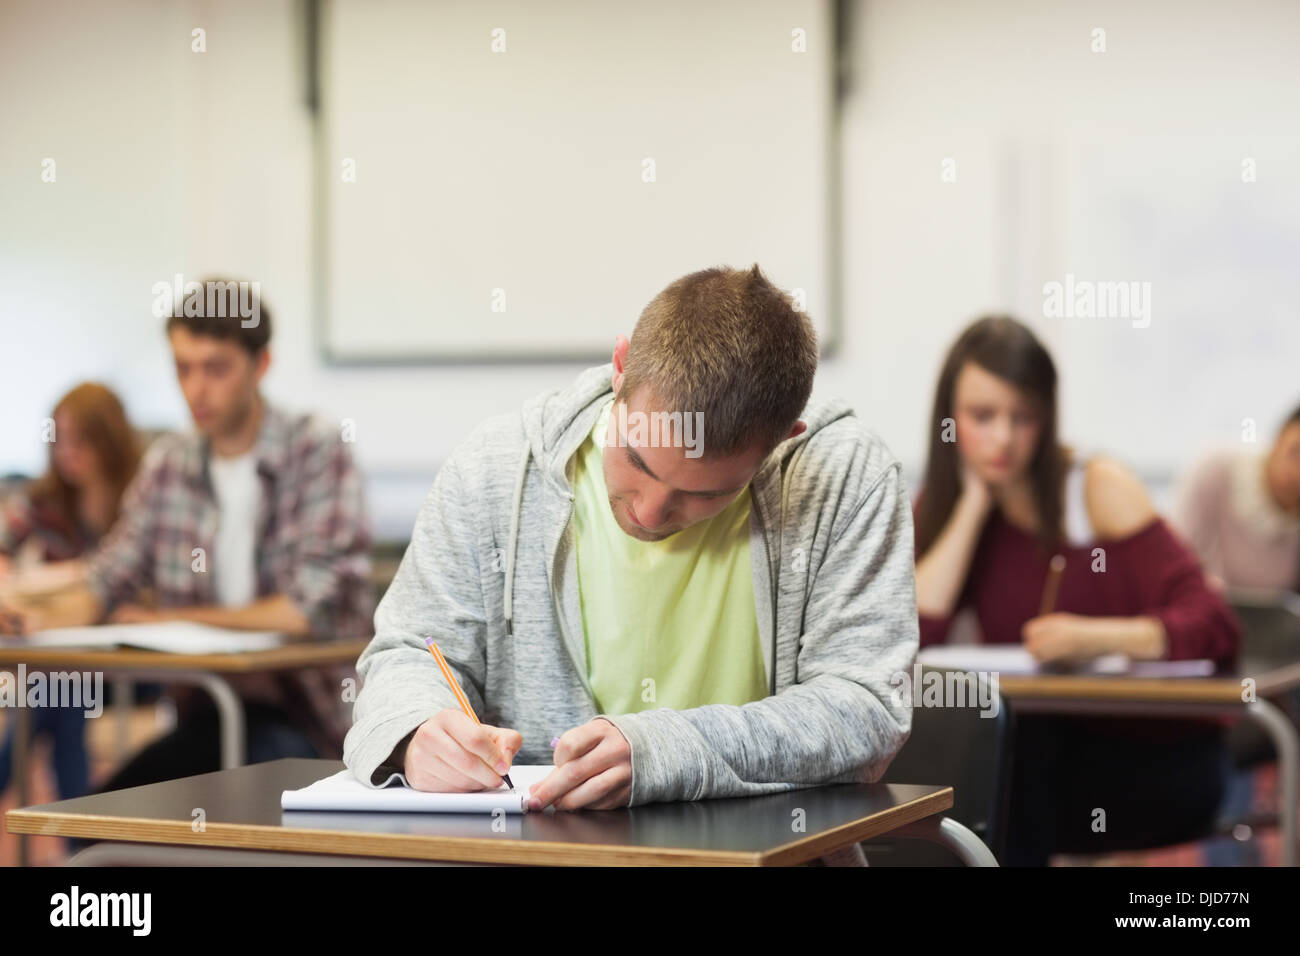 Focused young student taking notes in class Stock Photo